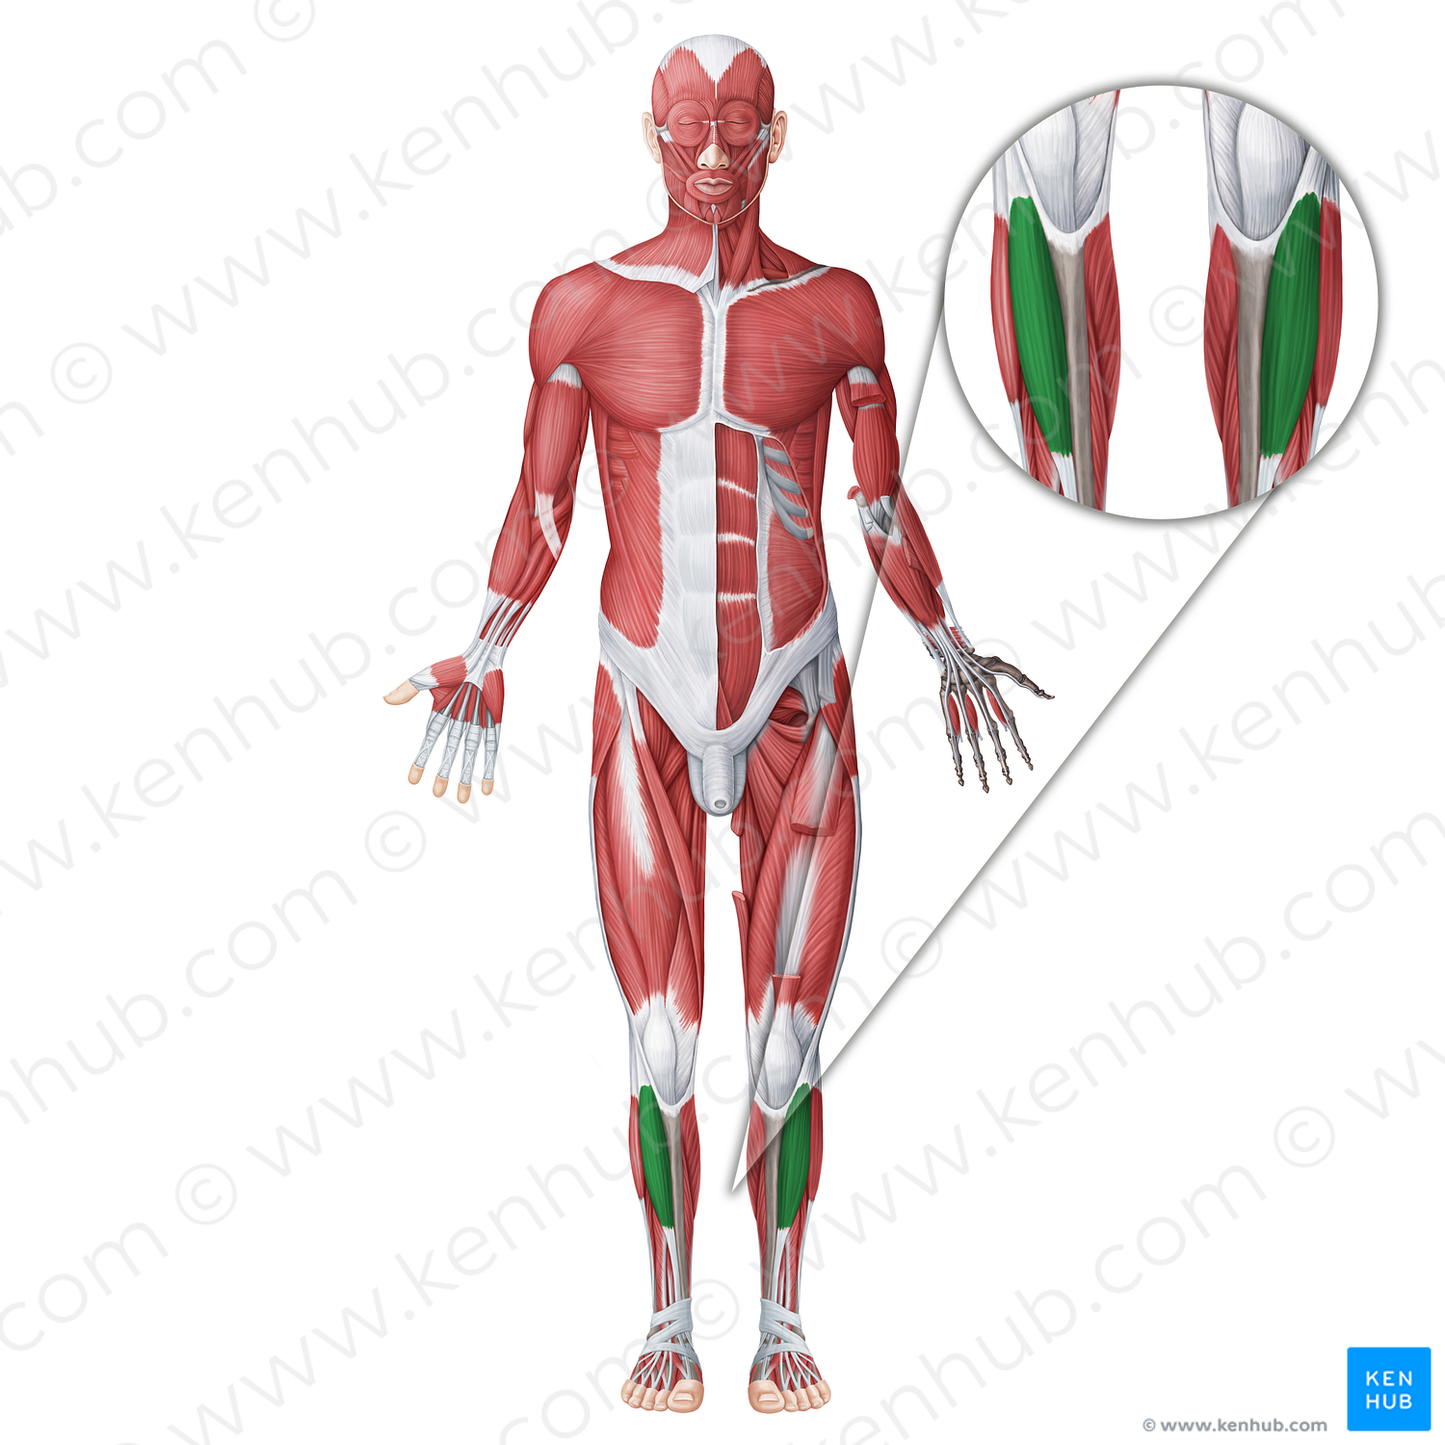 Tibialis anterior muscle (#18763)